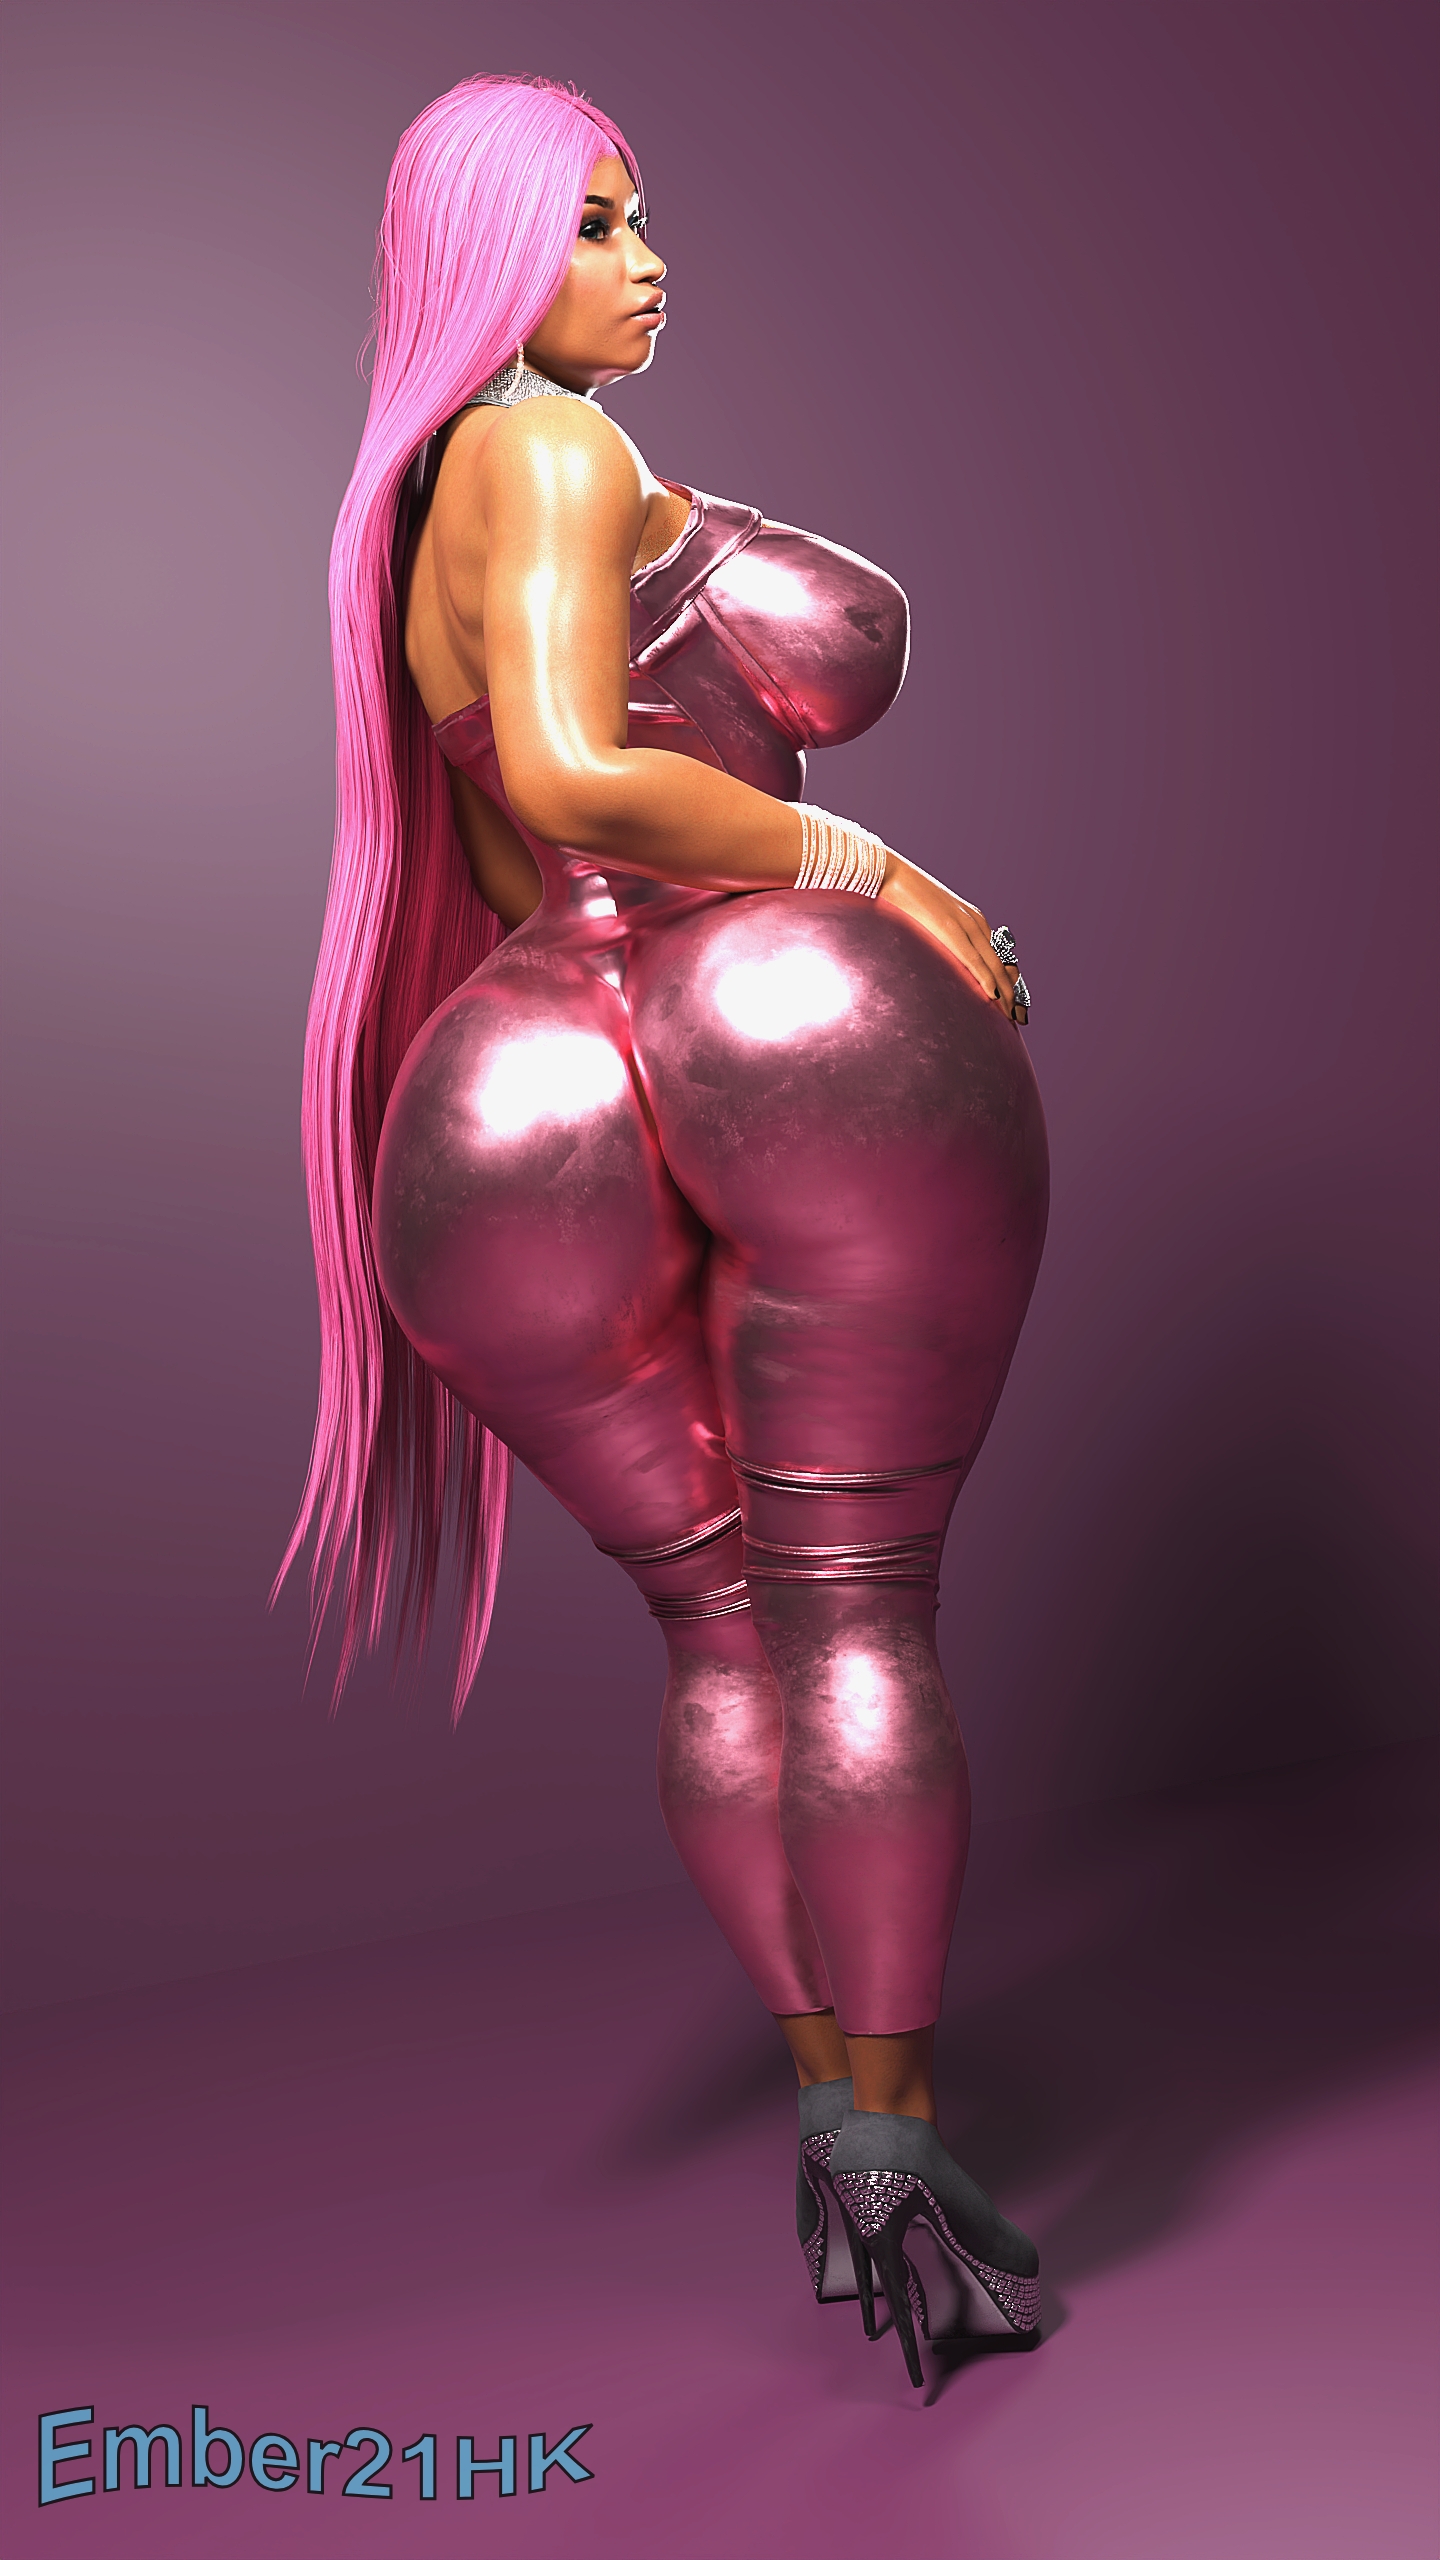 Nicki Posing Nicki Minaj Call Of Duty Thicc Thick Ass Thick Thighs Big Ass Big Tits Character 3d Porn Ass Boobs Big boobs Clothed/nude Jewels Necklace Bodysuit Long Hair Pink Hair Doggy Style Position Ass Up